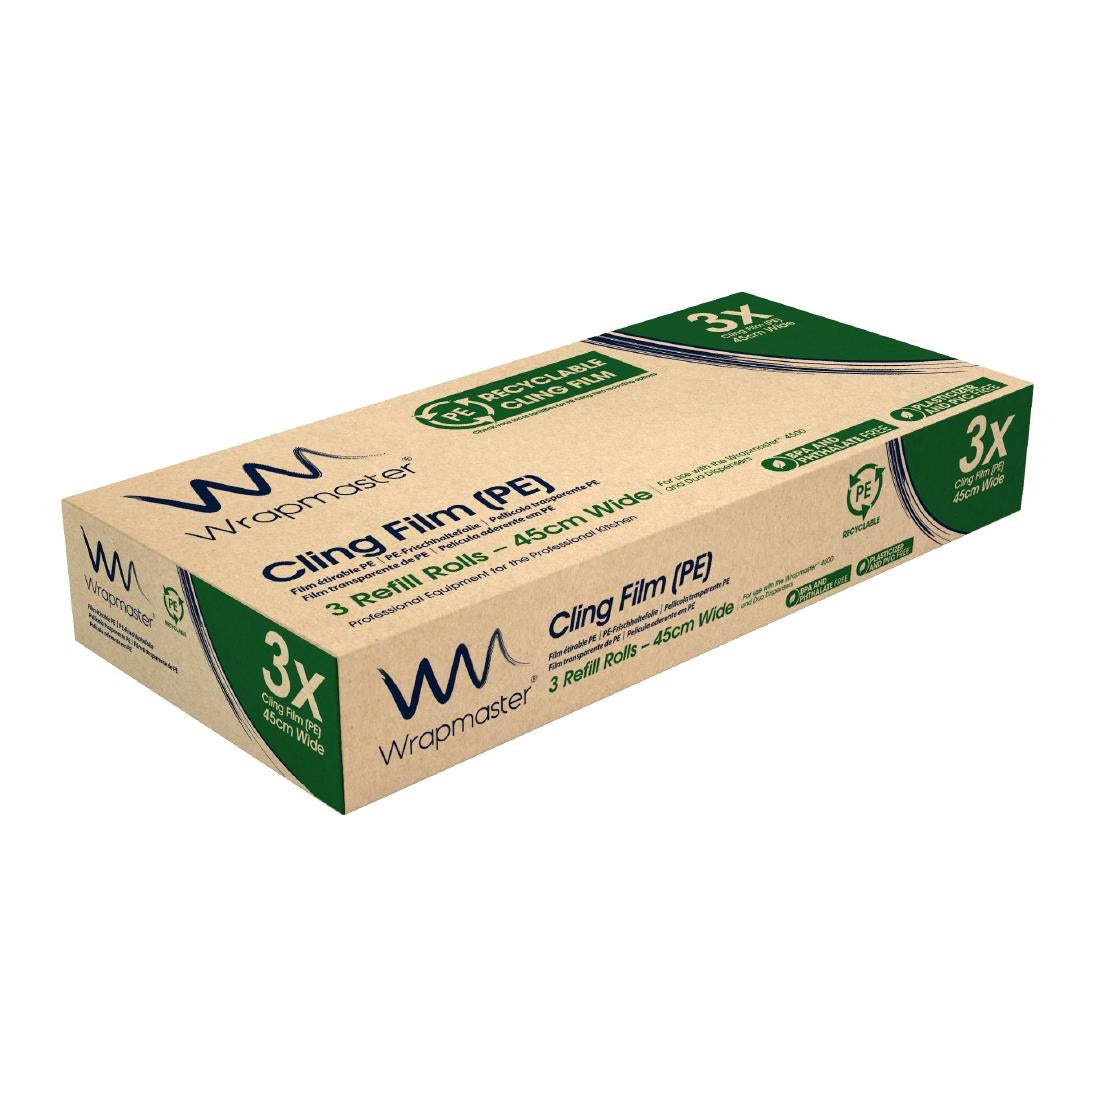 GL382 Wrapmaster PE Cling Film Refill for Wrapmaster 4500 450mm x 300m (Pack of 3)